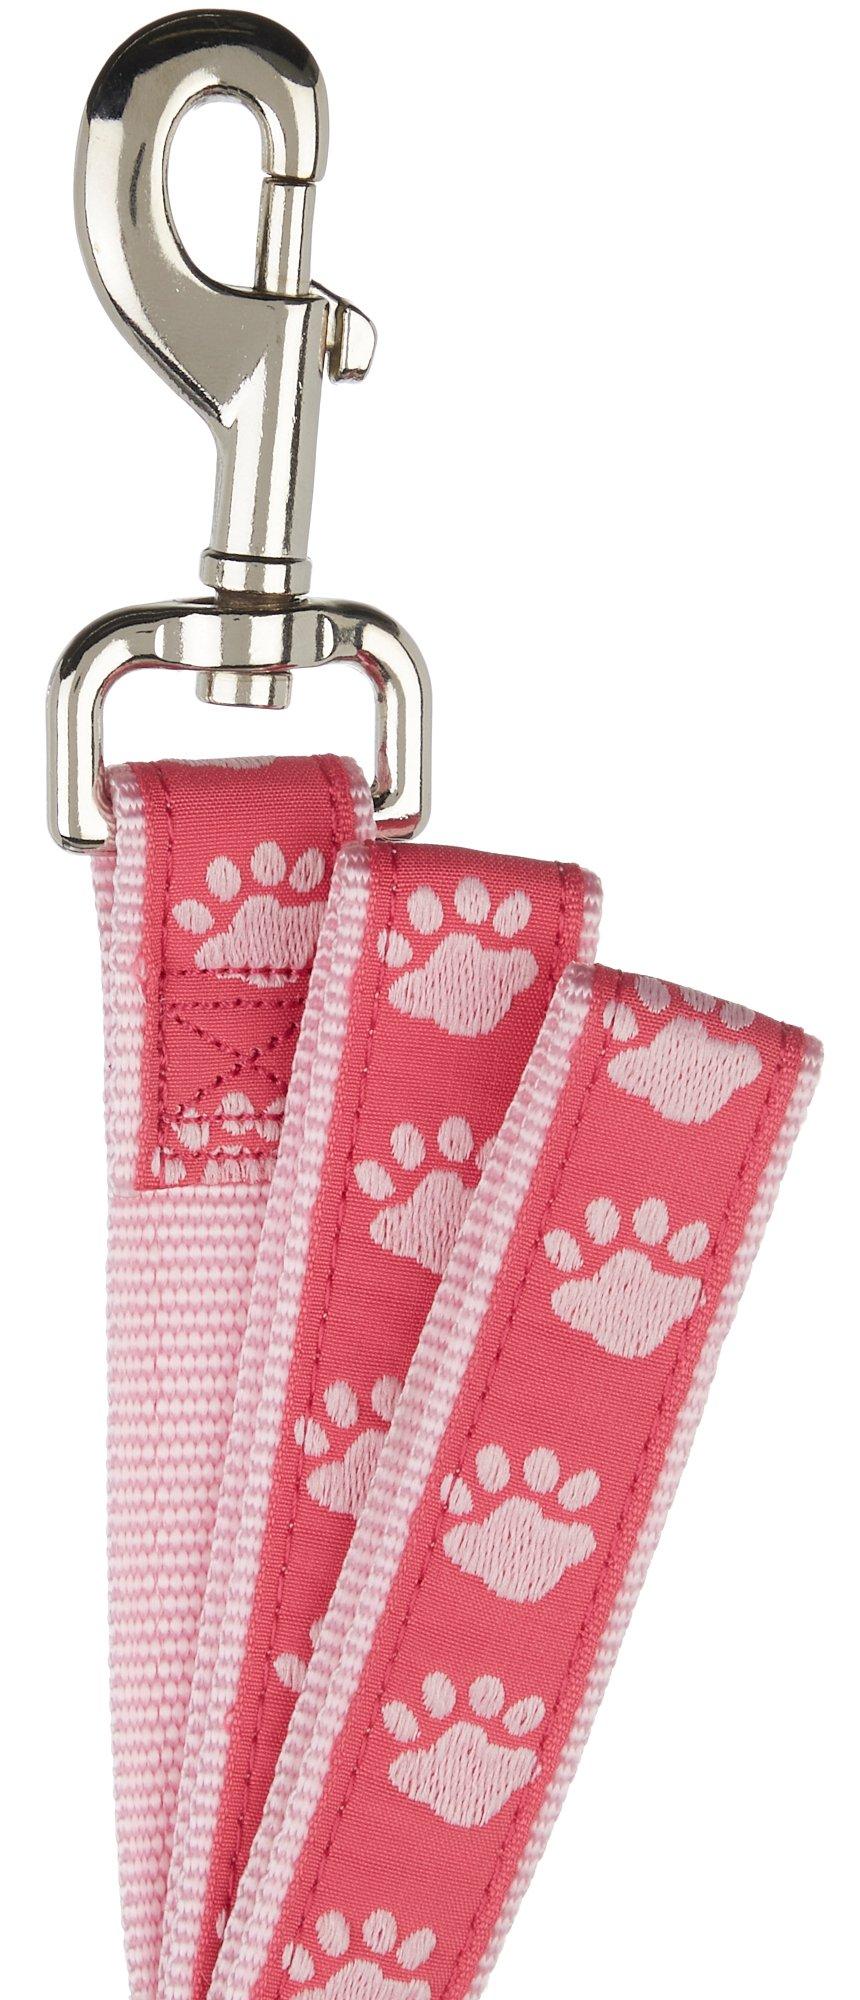 6 Ft. Large Paw Print Woven Dog Lead Leash